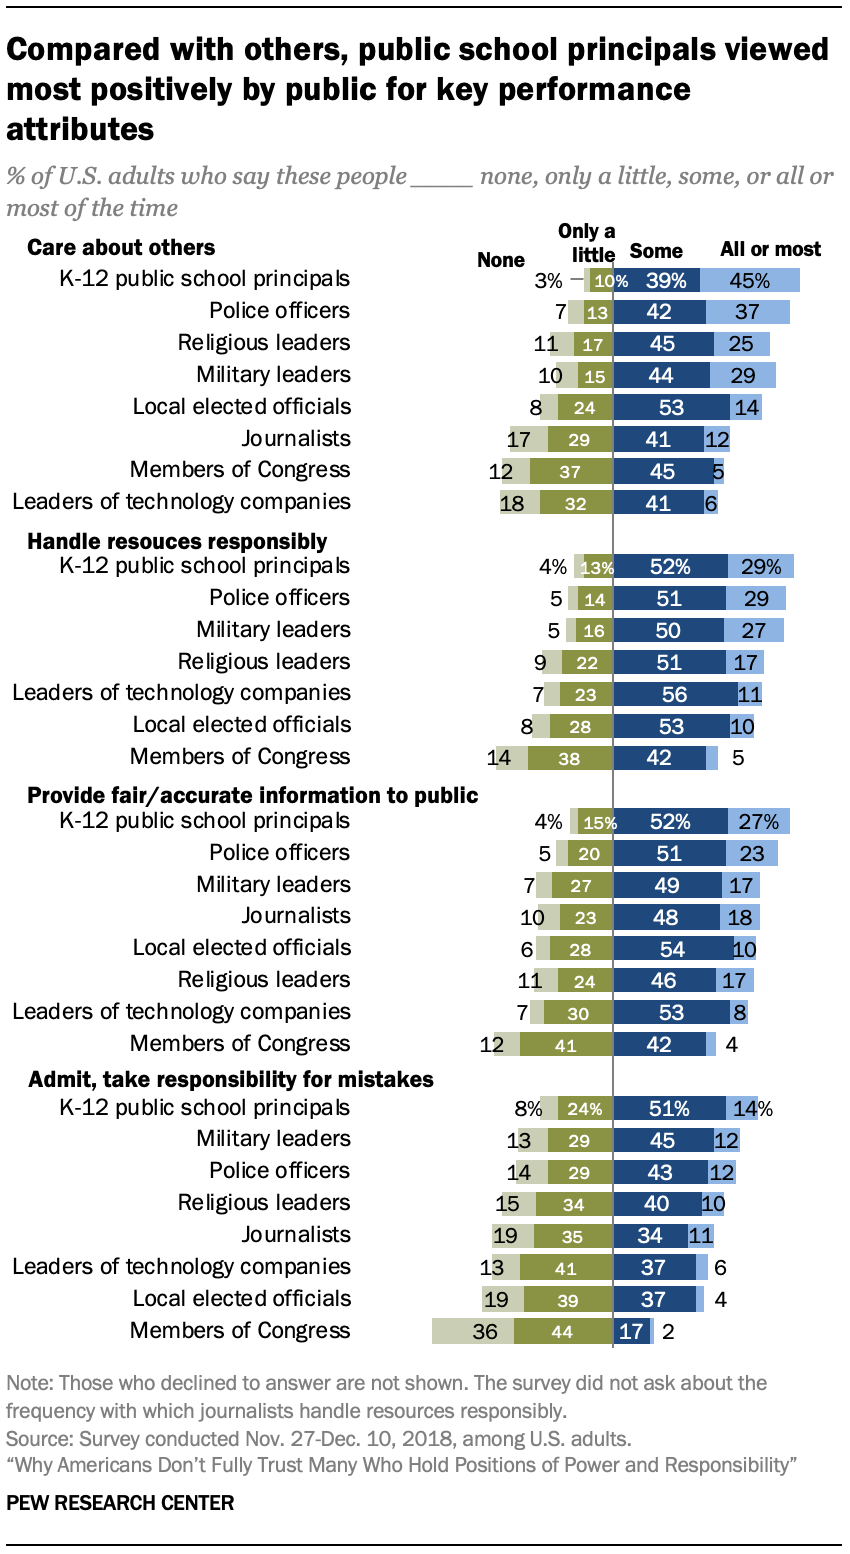 Compared with others, public school principals viewed most positively by public for key performance attributes